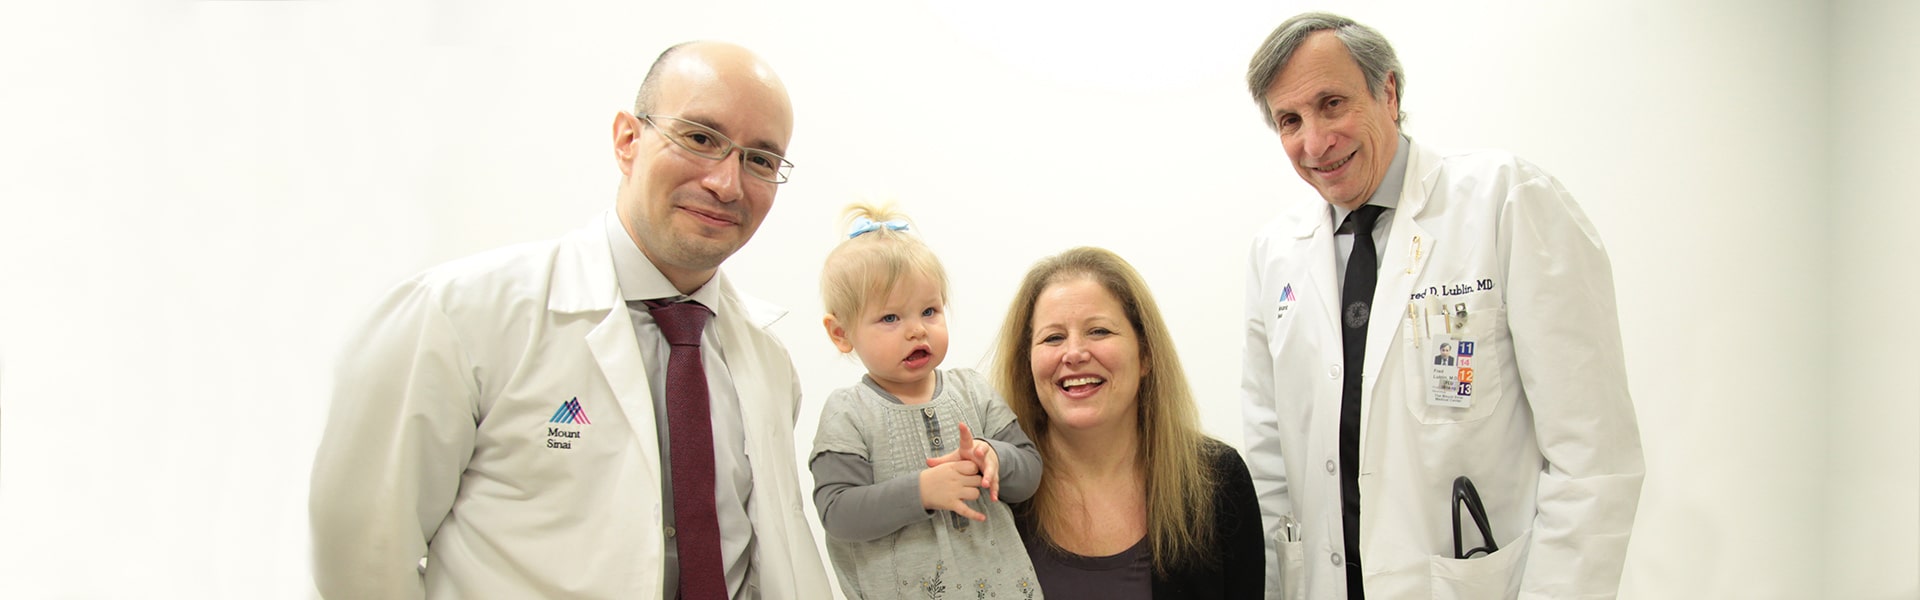 Image of Dr. Stephen Krieger and Dr. Fred Lublin with patient and child